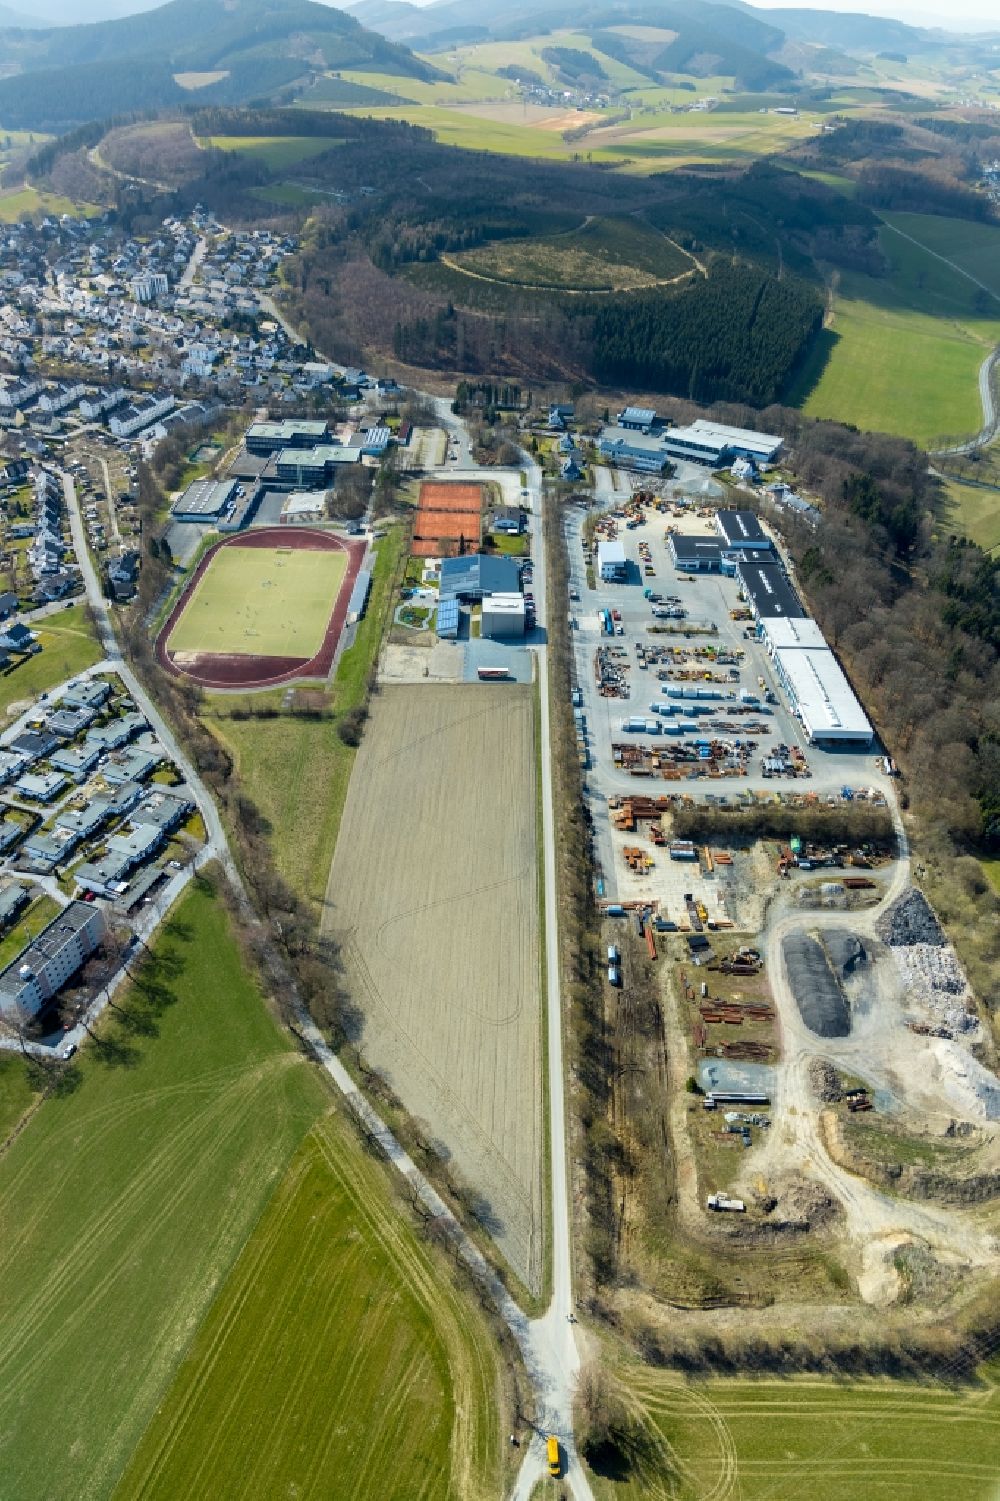 Aerial photograph Schmallenberg - Factory premises of the Maschinen + Technik Sauerland Verwaltungs GmbH and sports grounds in Schmallenberg in the federal state of North Rhine-Westphalia, Germany